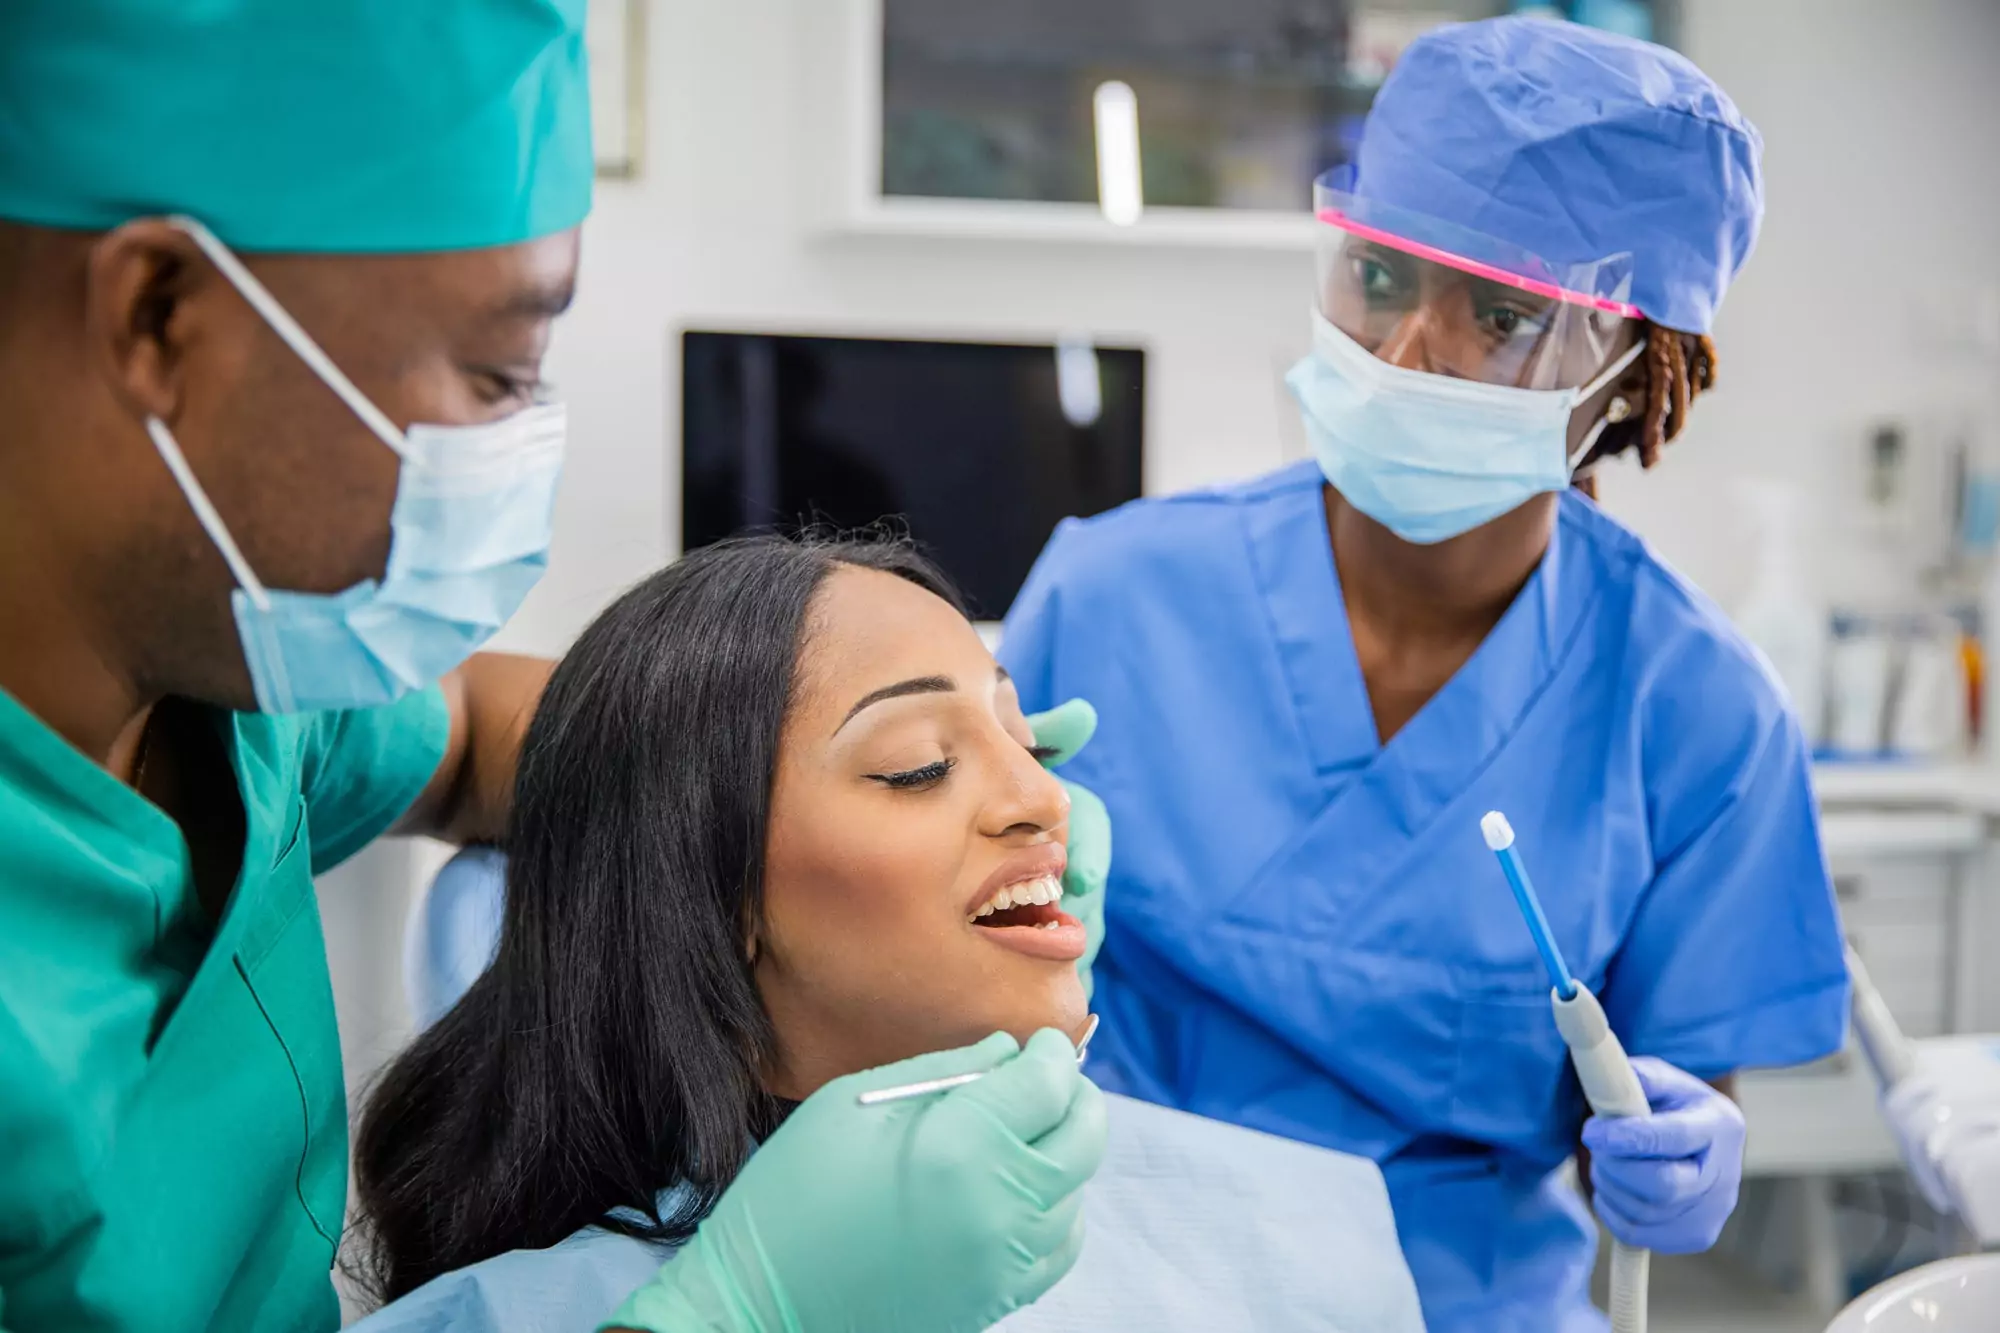 Girl with open mouth during a dental visit, dentist and assistant at work, dental health concept